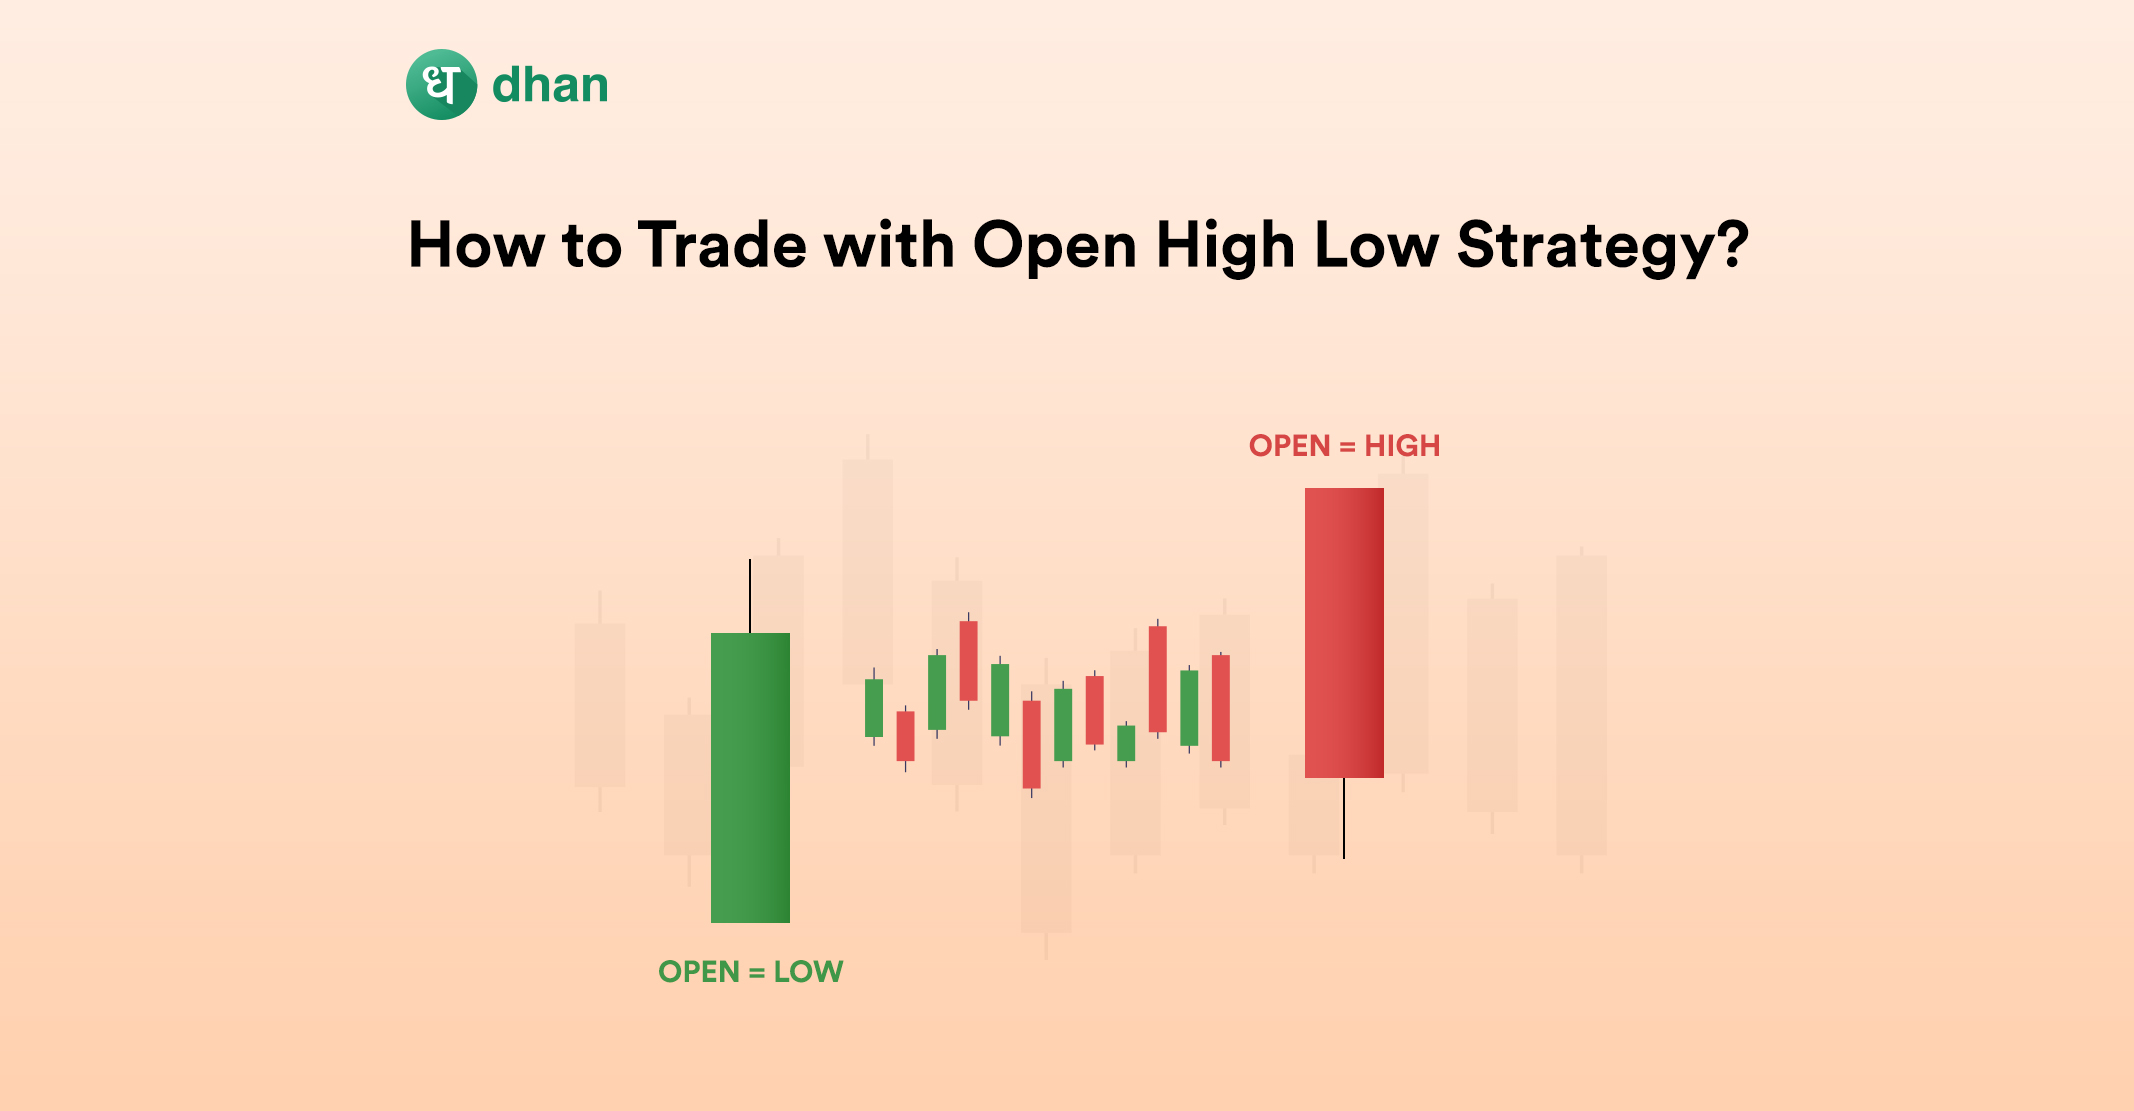 Open High Open Low - How to Trade with Open High Low Strategy